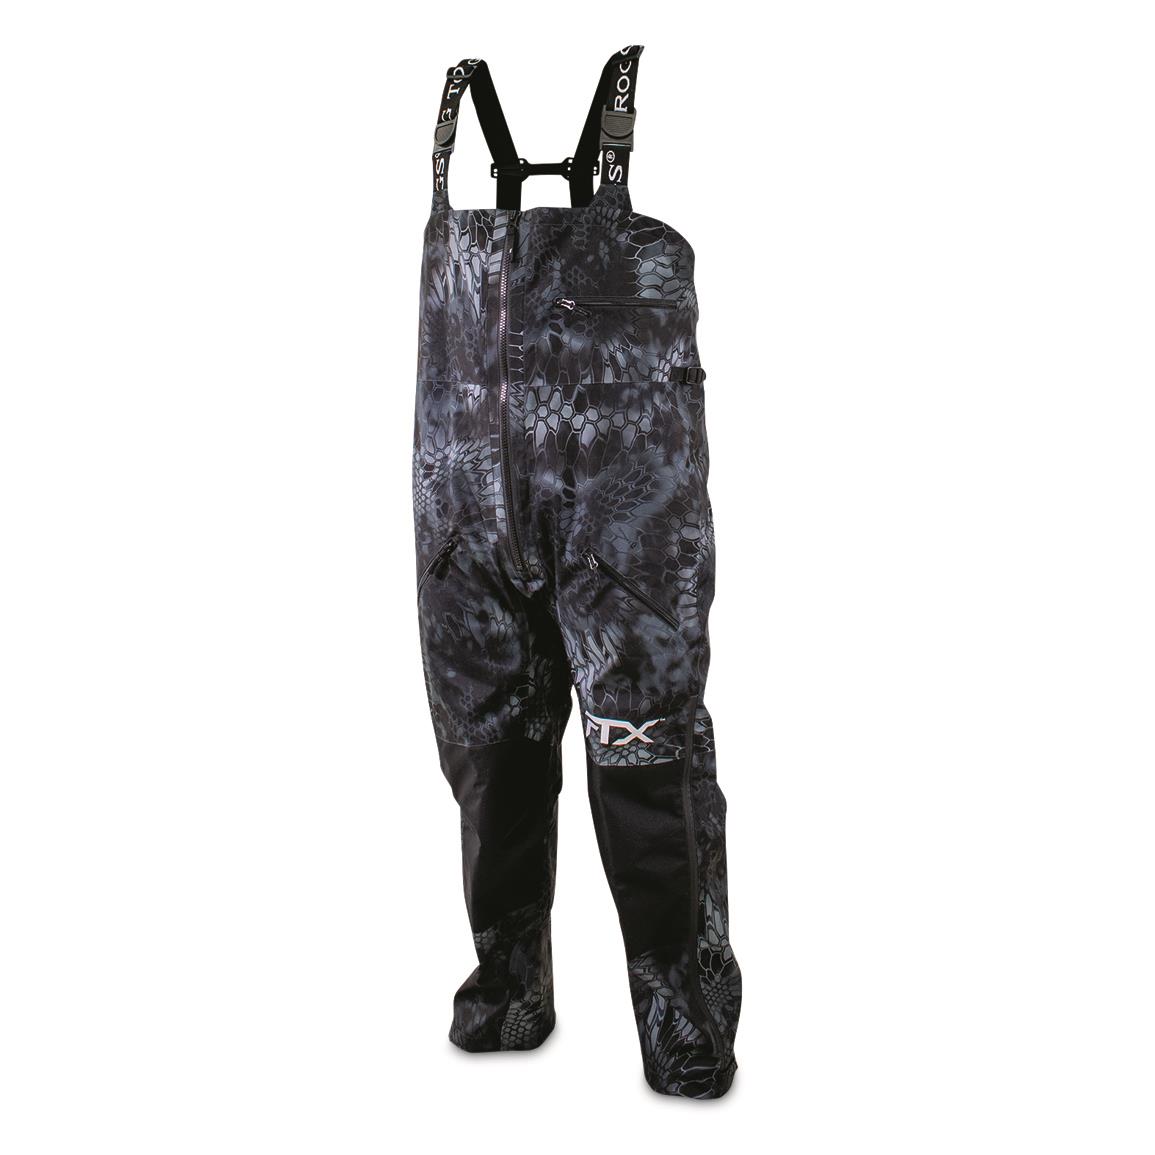 StrikeMaster Men's Pro Waterproof Insulated Flotation Bibs - 731101,  Insulated Pants, Overalls & Coveralls at Sportsman's Guide